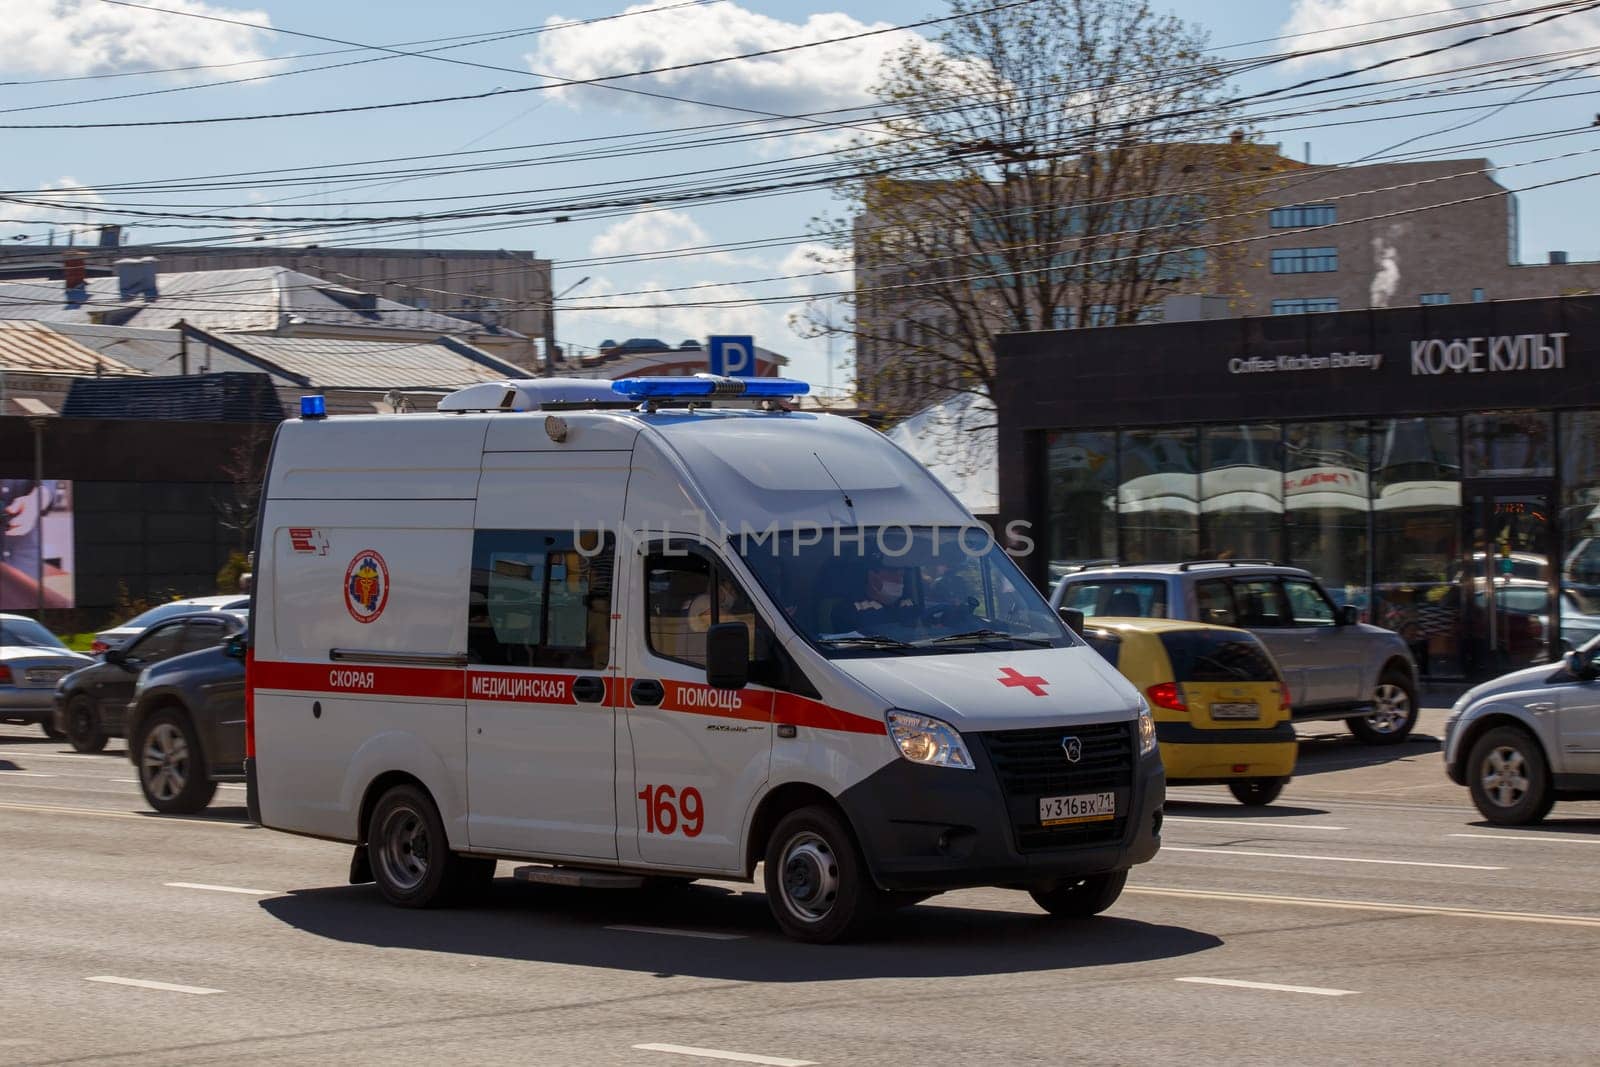 white ambulance minibus driving along city street at sunny day in Tula, Russia - June 7, 2021